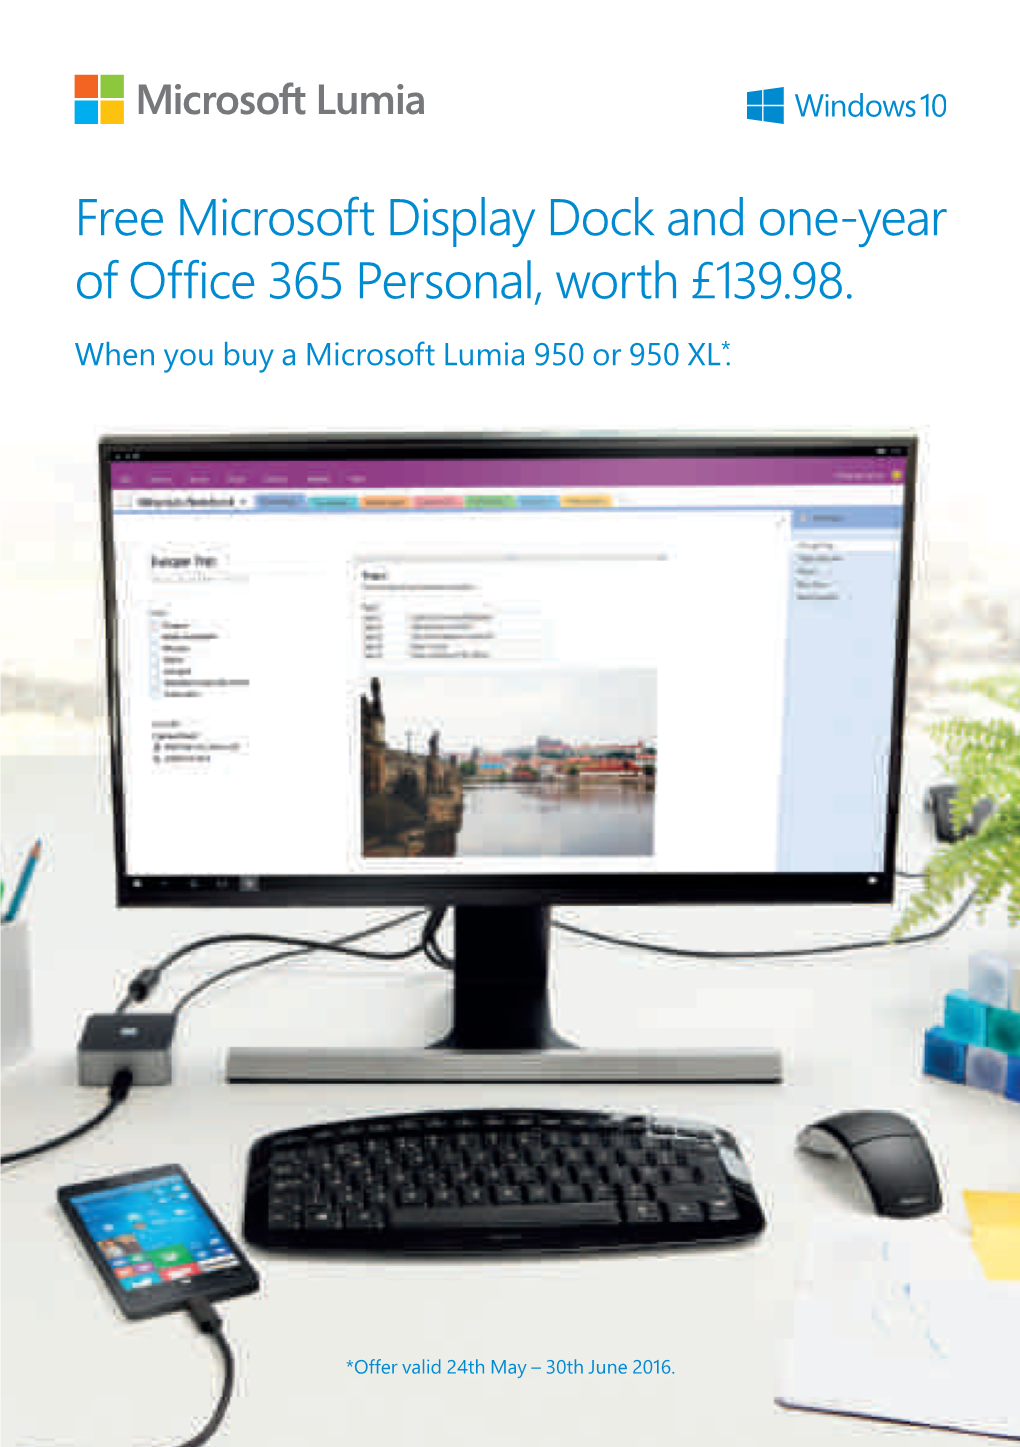 Free Microsoft Display Dock and One-Year of Office 365 Personal, Worth £139.98